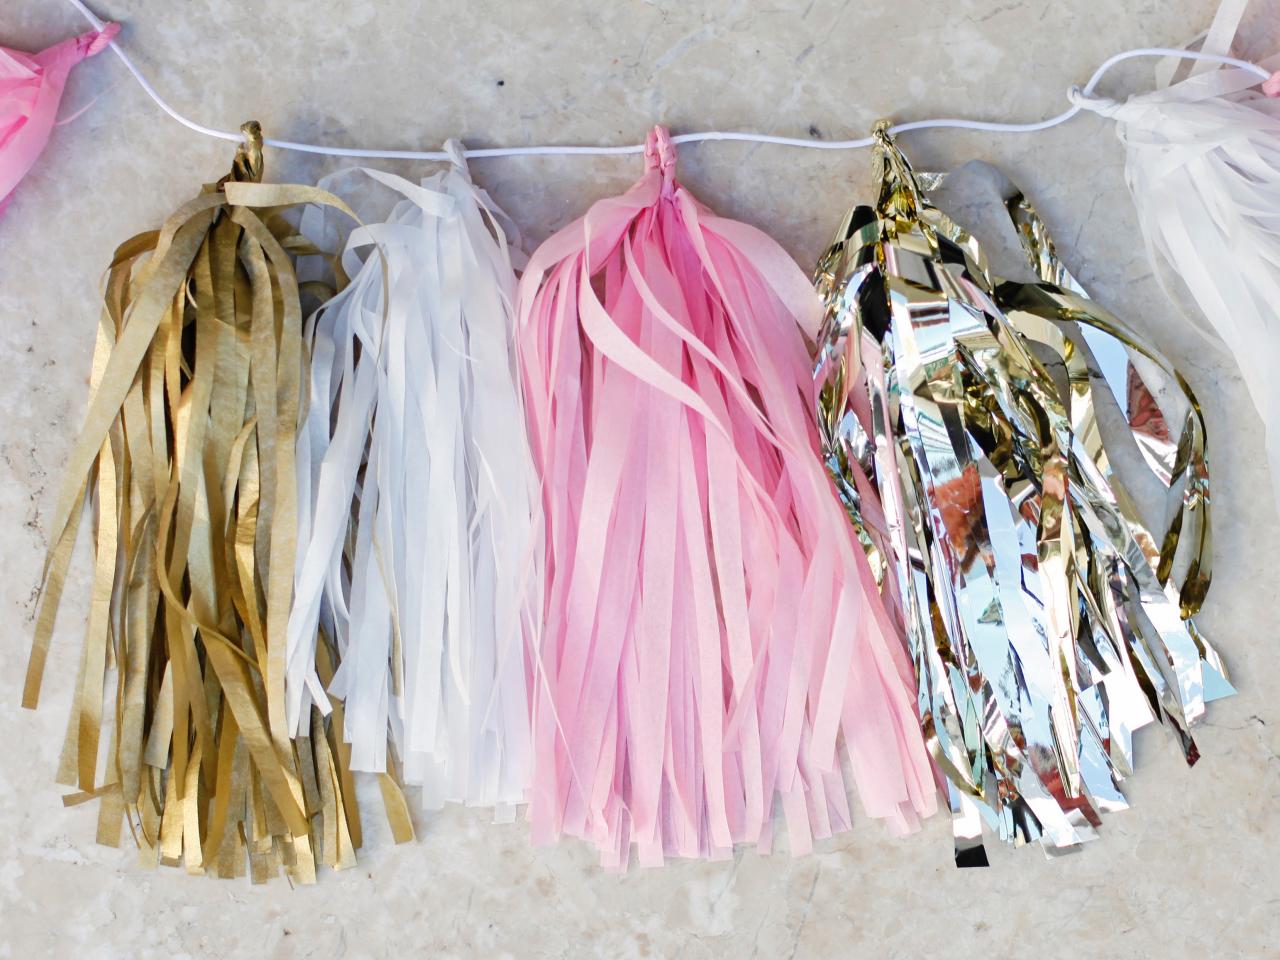 party tassels